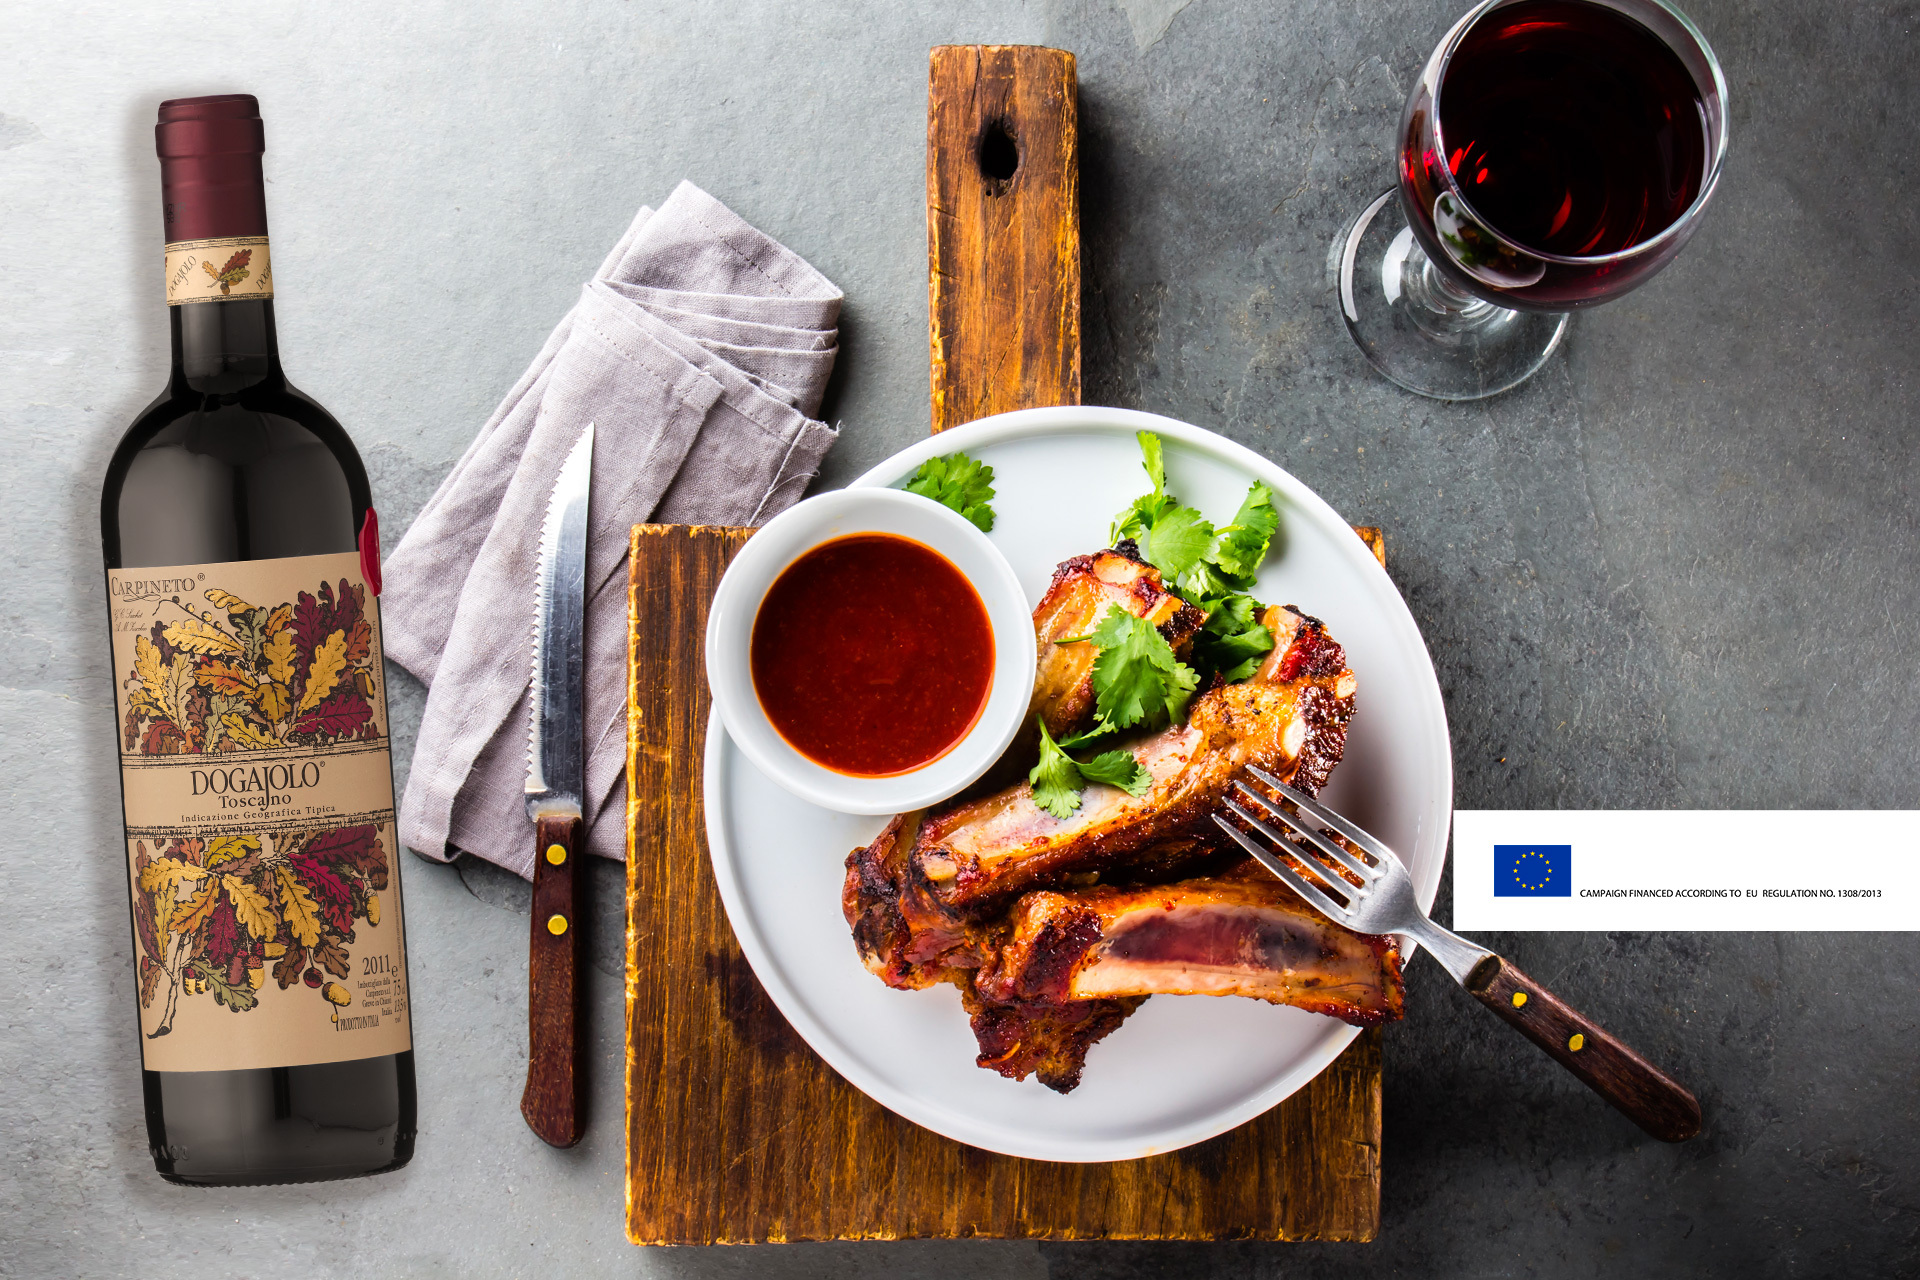 Pork ribs recipe and red wine pairing
